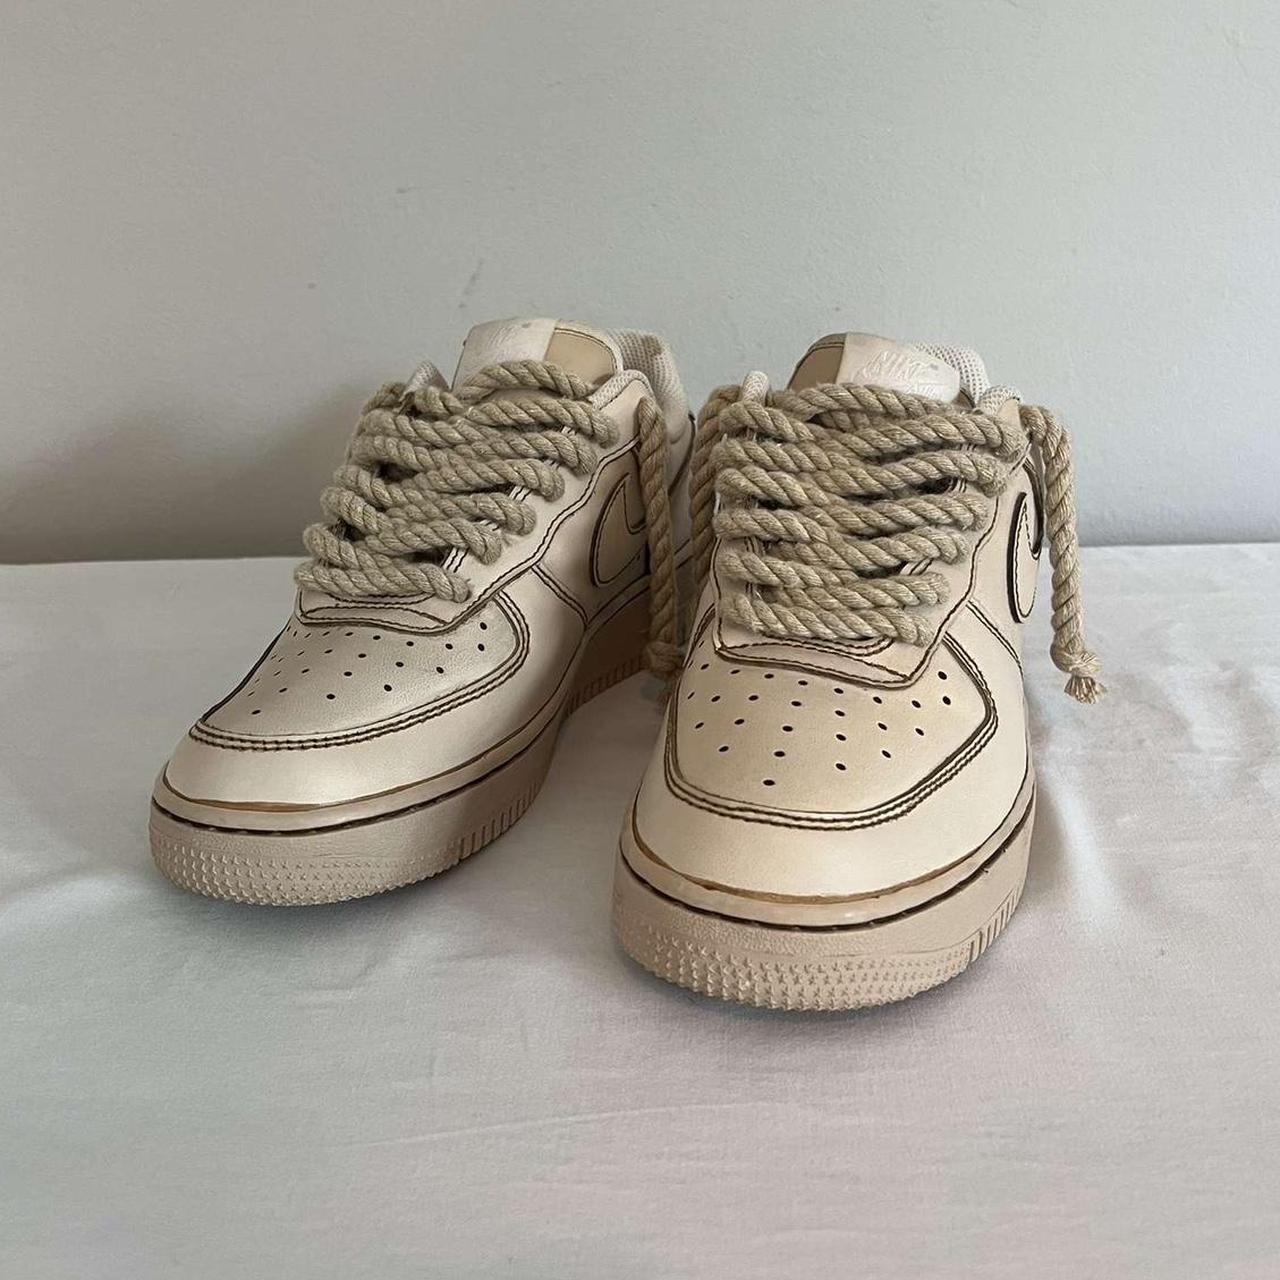 Air Force 1 rope laces custom forces with rope - Depop